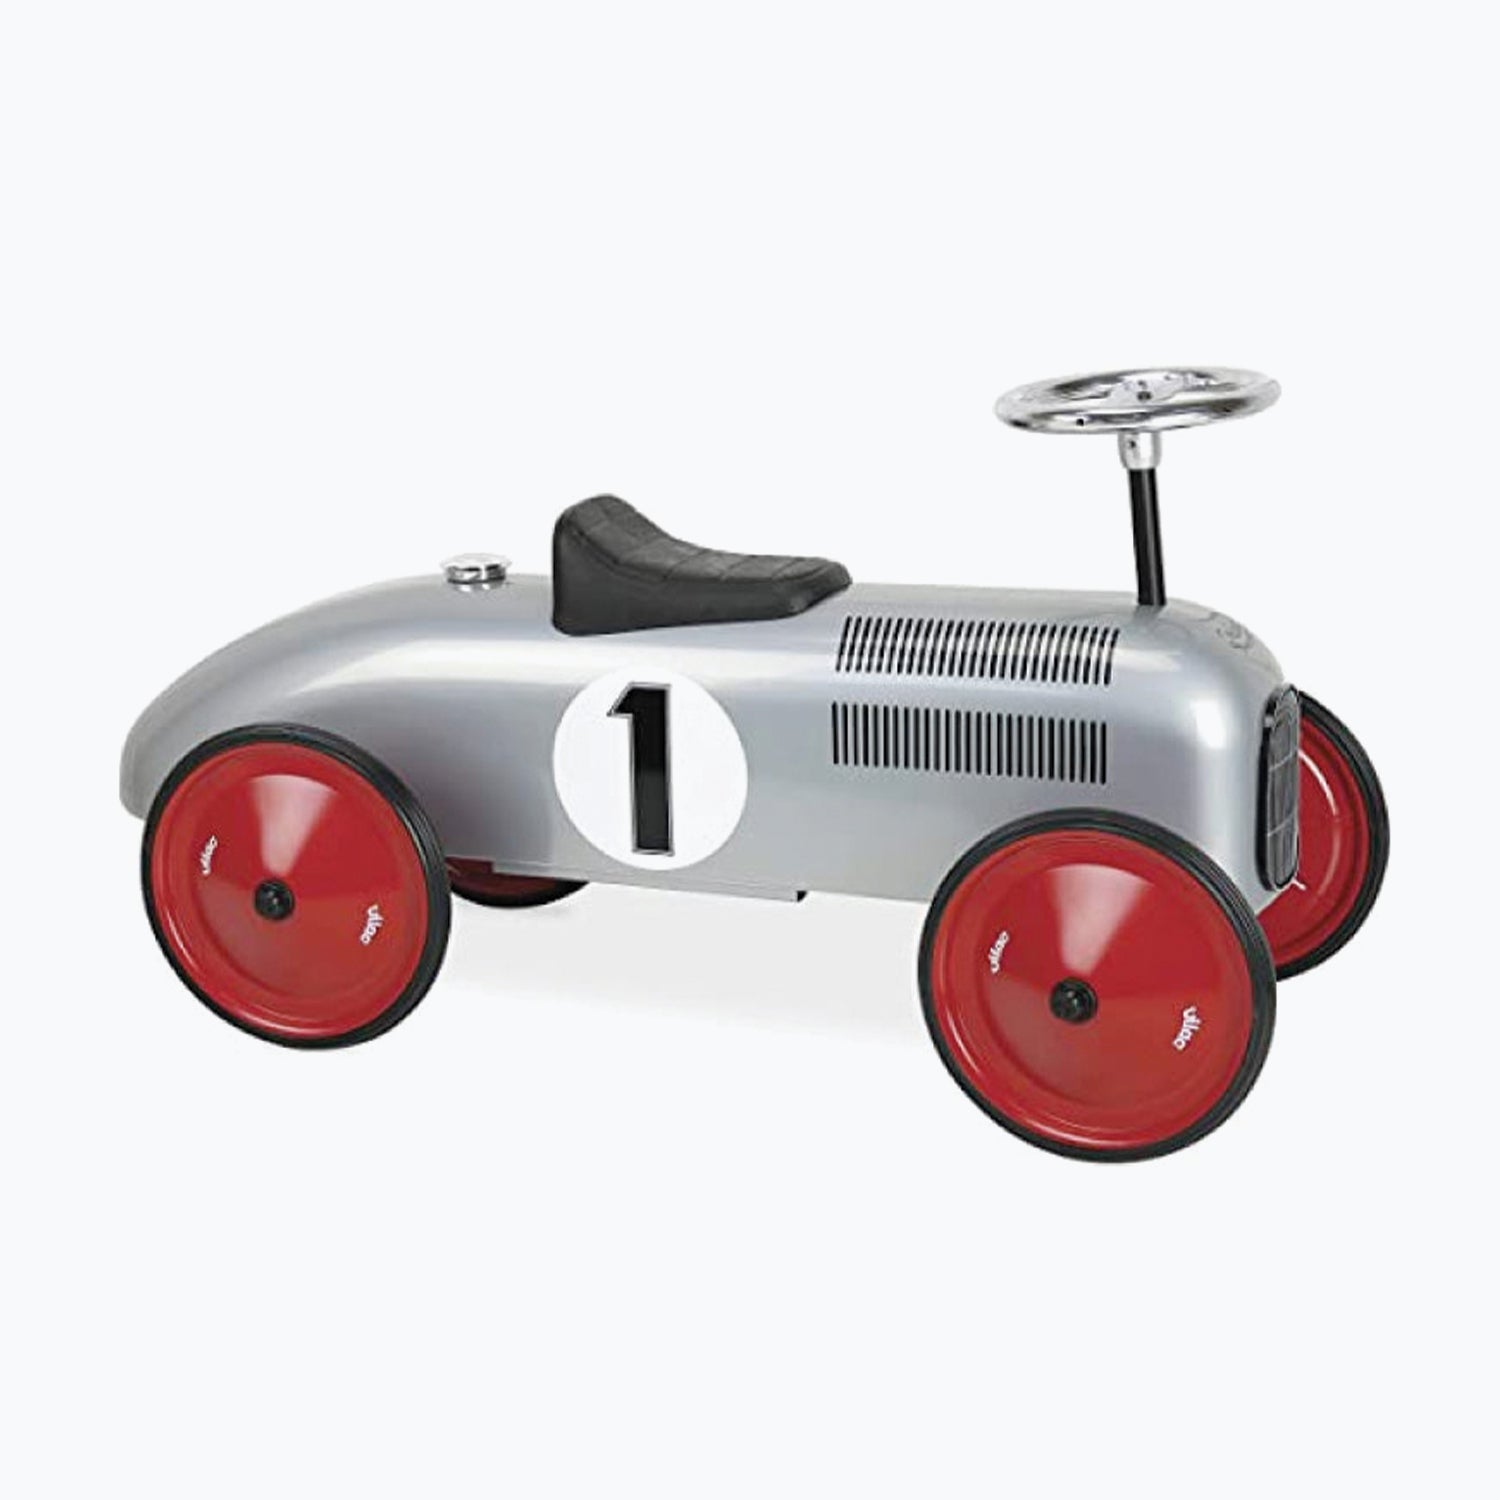 An image of Vilac Vintage Ride On Car - Classic Metal Ride-On Vilac Car Vintage Grey Metal